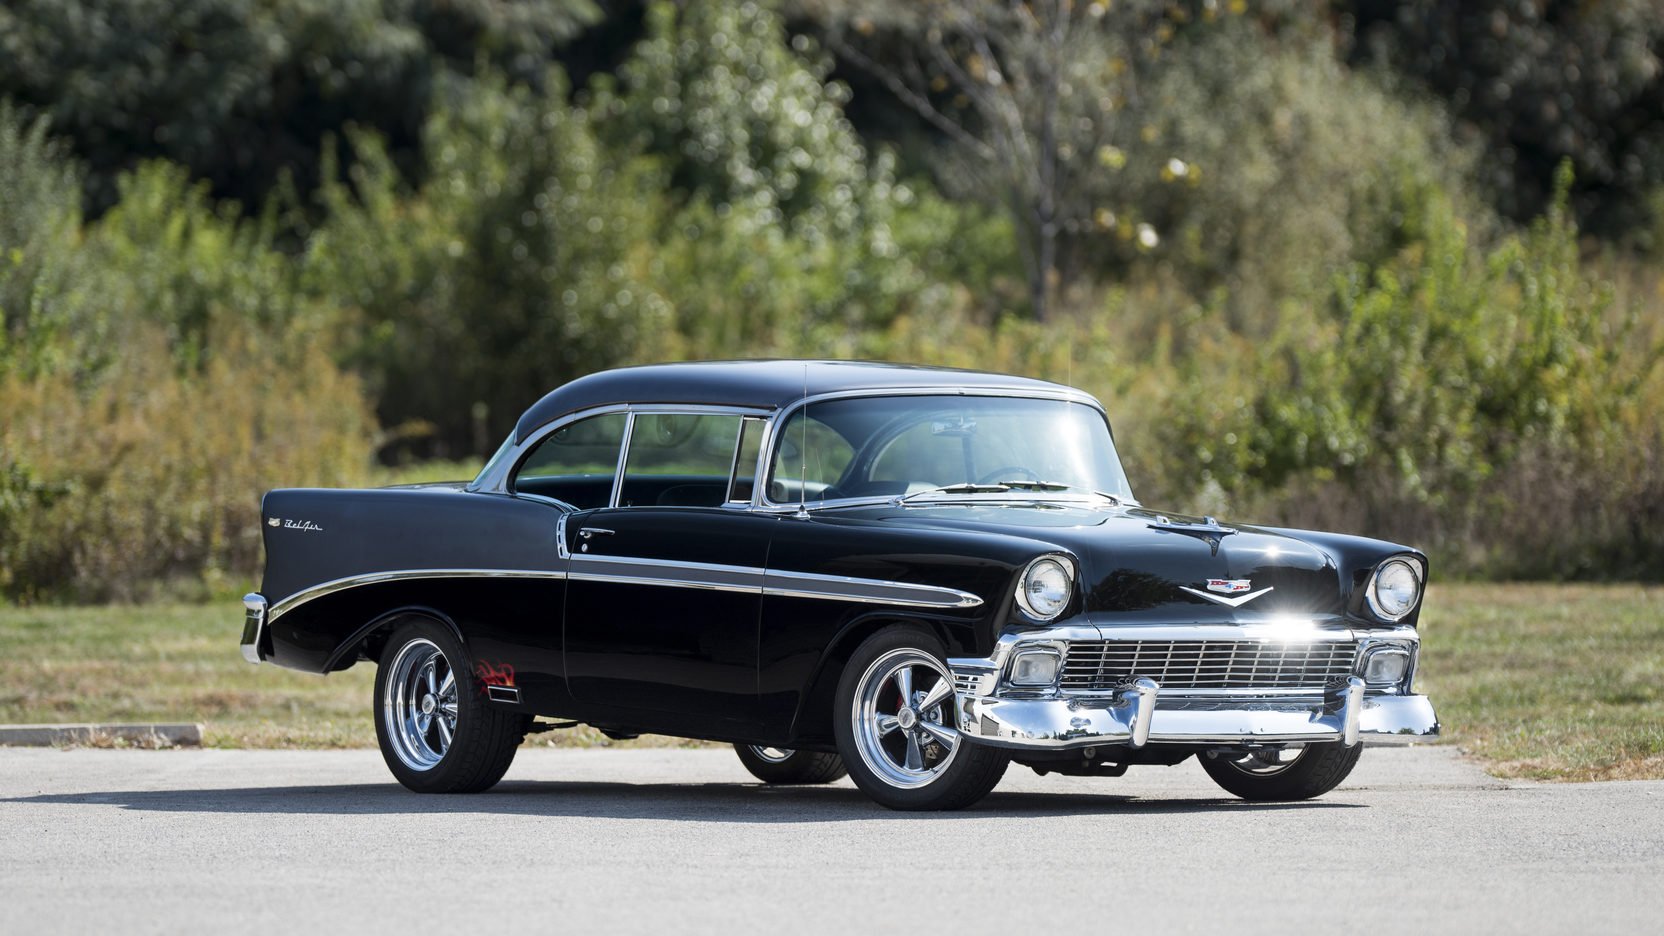 1956 Chevrolet Bel Air Resto Mod Cars Classic Wallpapers Hd